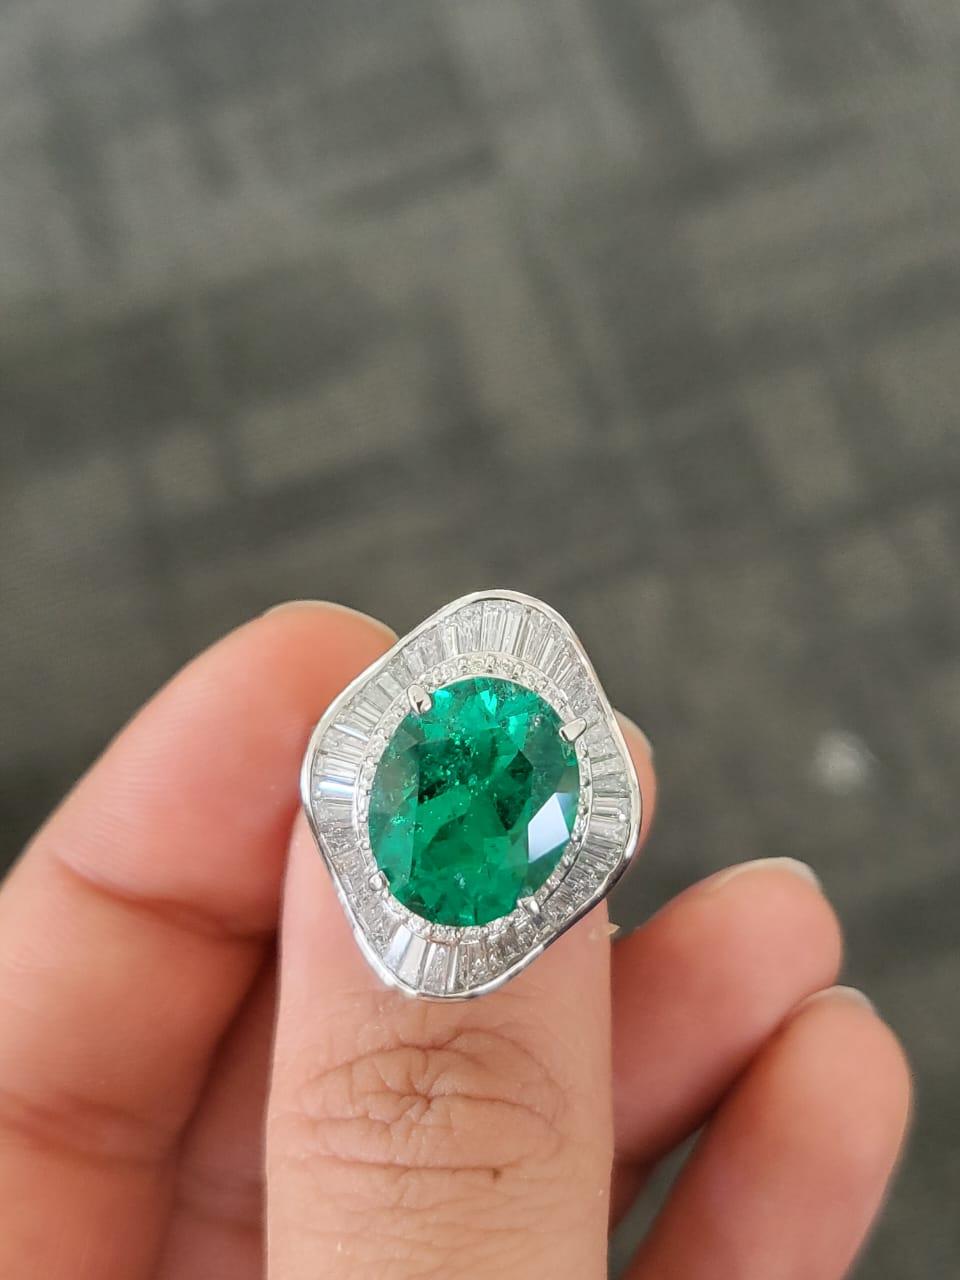 A very gorgeous and special, Colombian Emerald Engagement/ Cocktail Ring set in PT900 & Diamonds. The weight of the oval Emerald is 6.42 carats. The Emerald is of Vivid Green colour, with minor surface cavity fillings. The Emerald is of Colombian